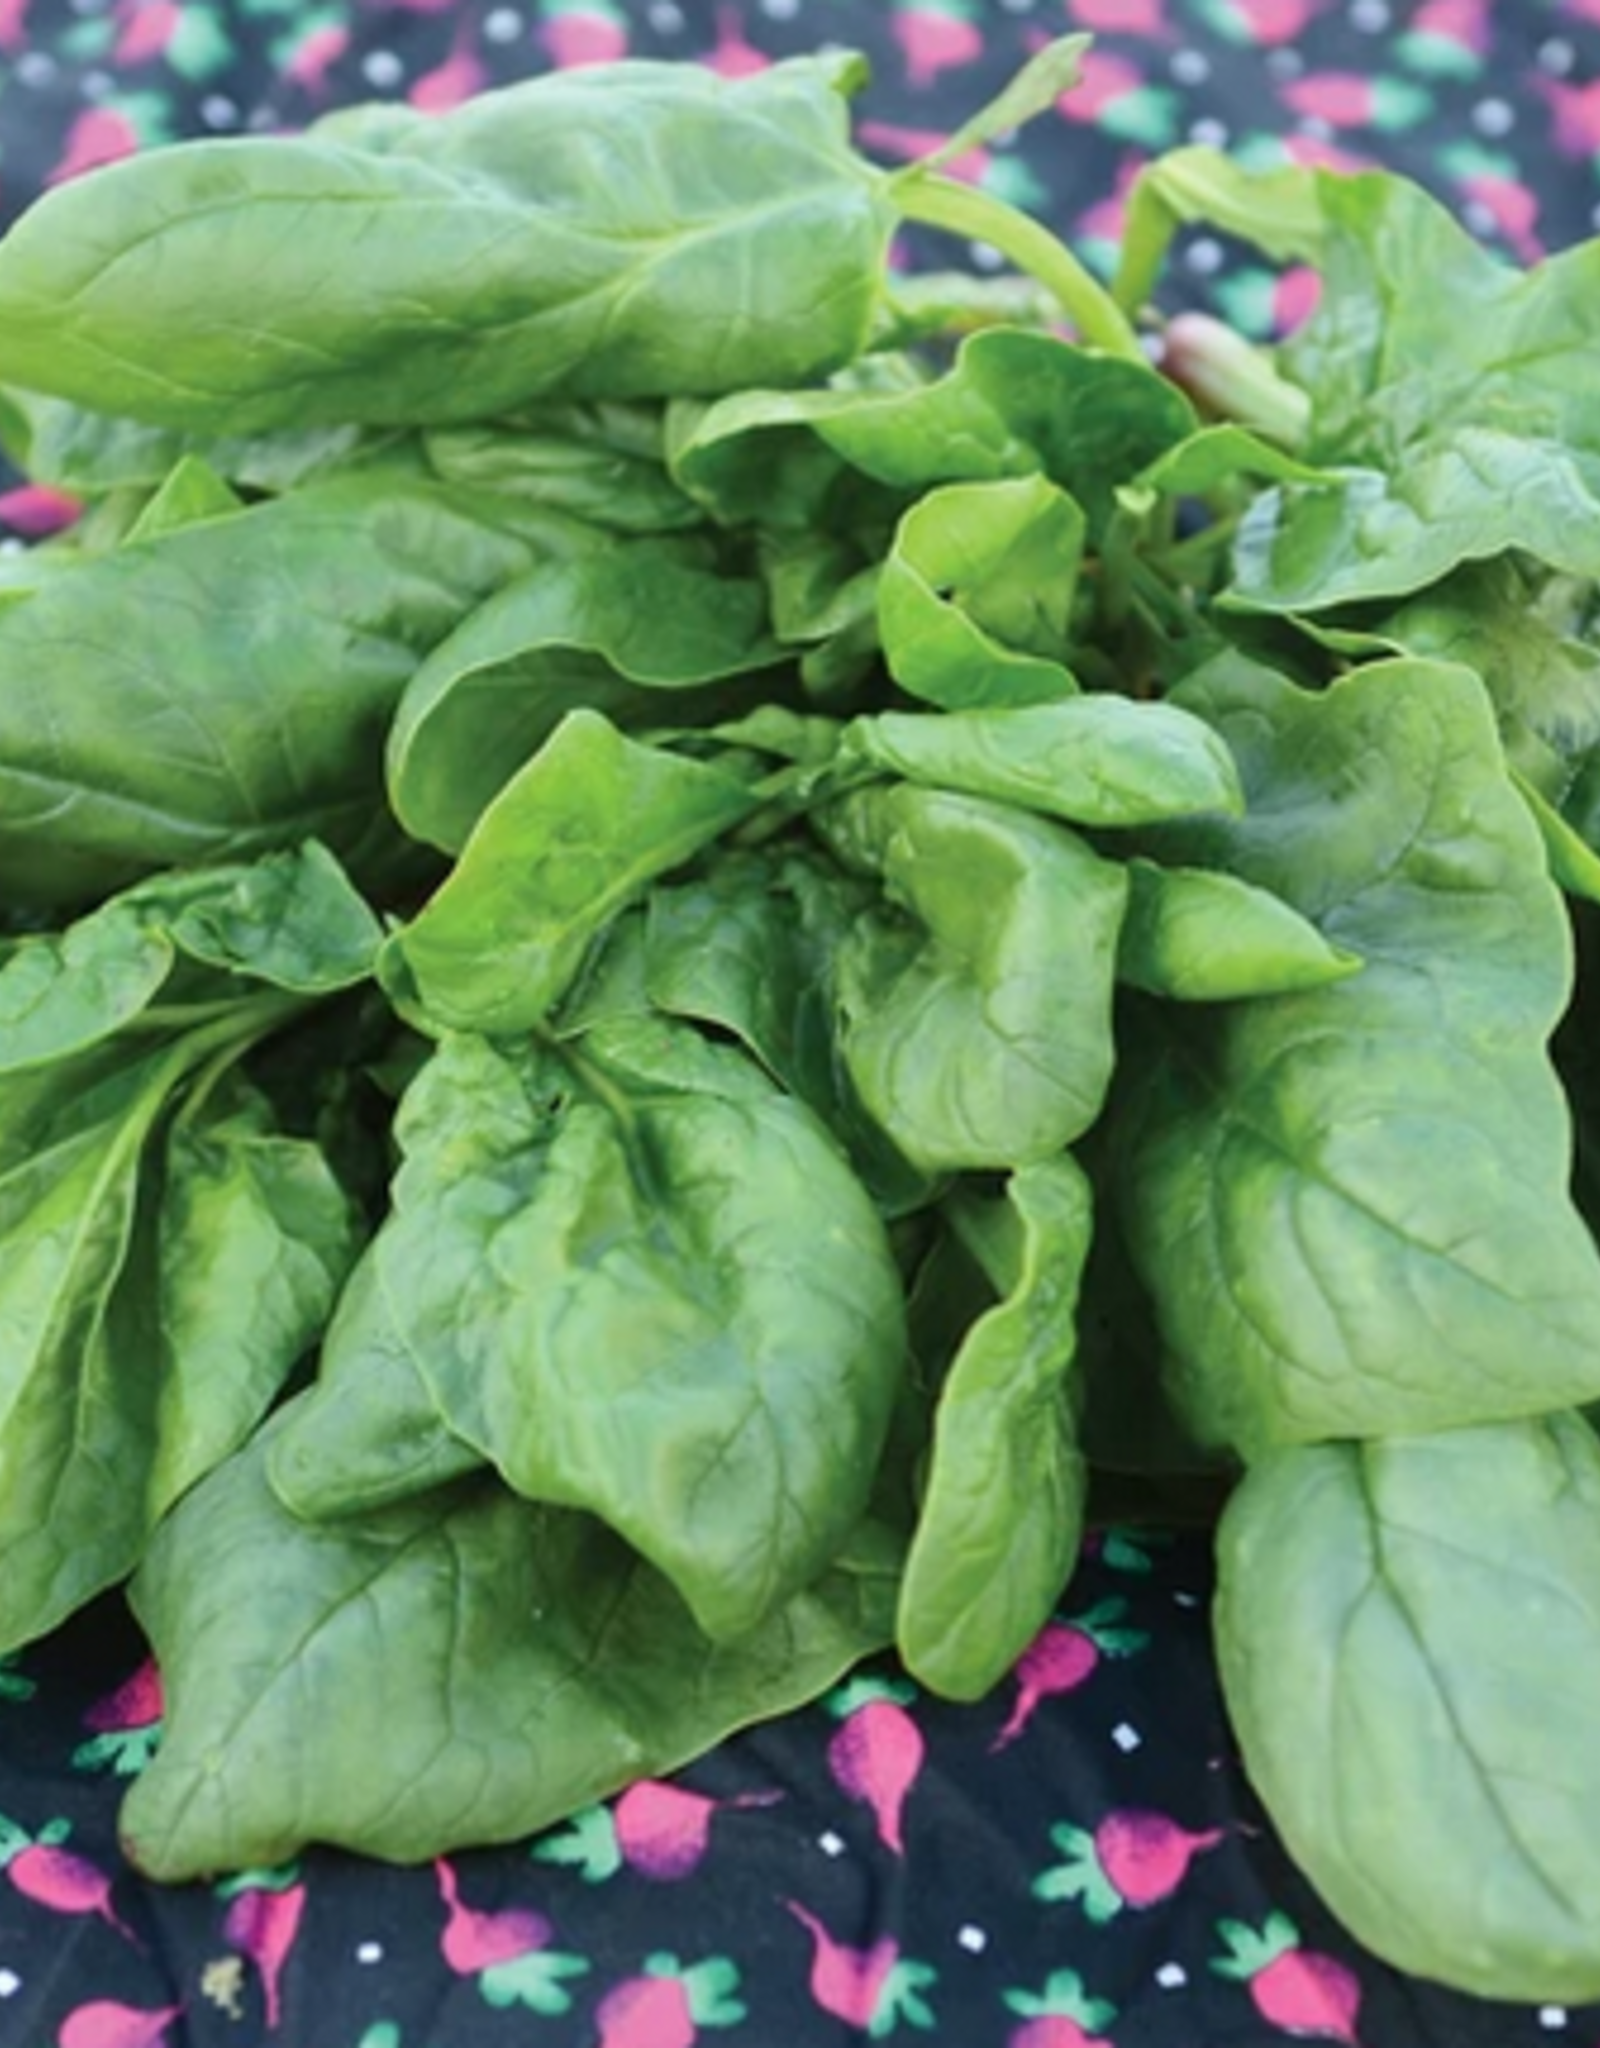 Territorial Seed Company SPINACH OLYMPIA 5 grams